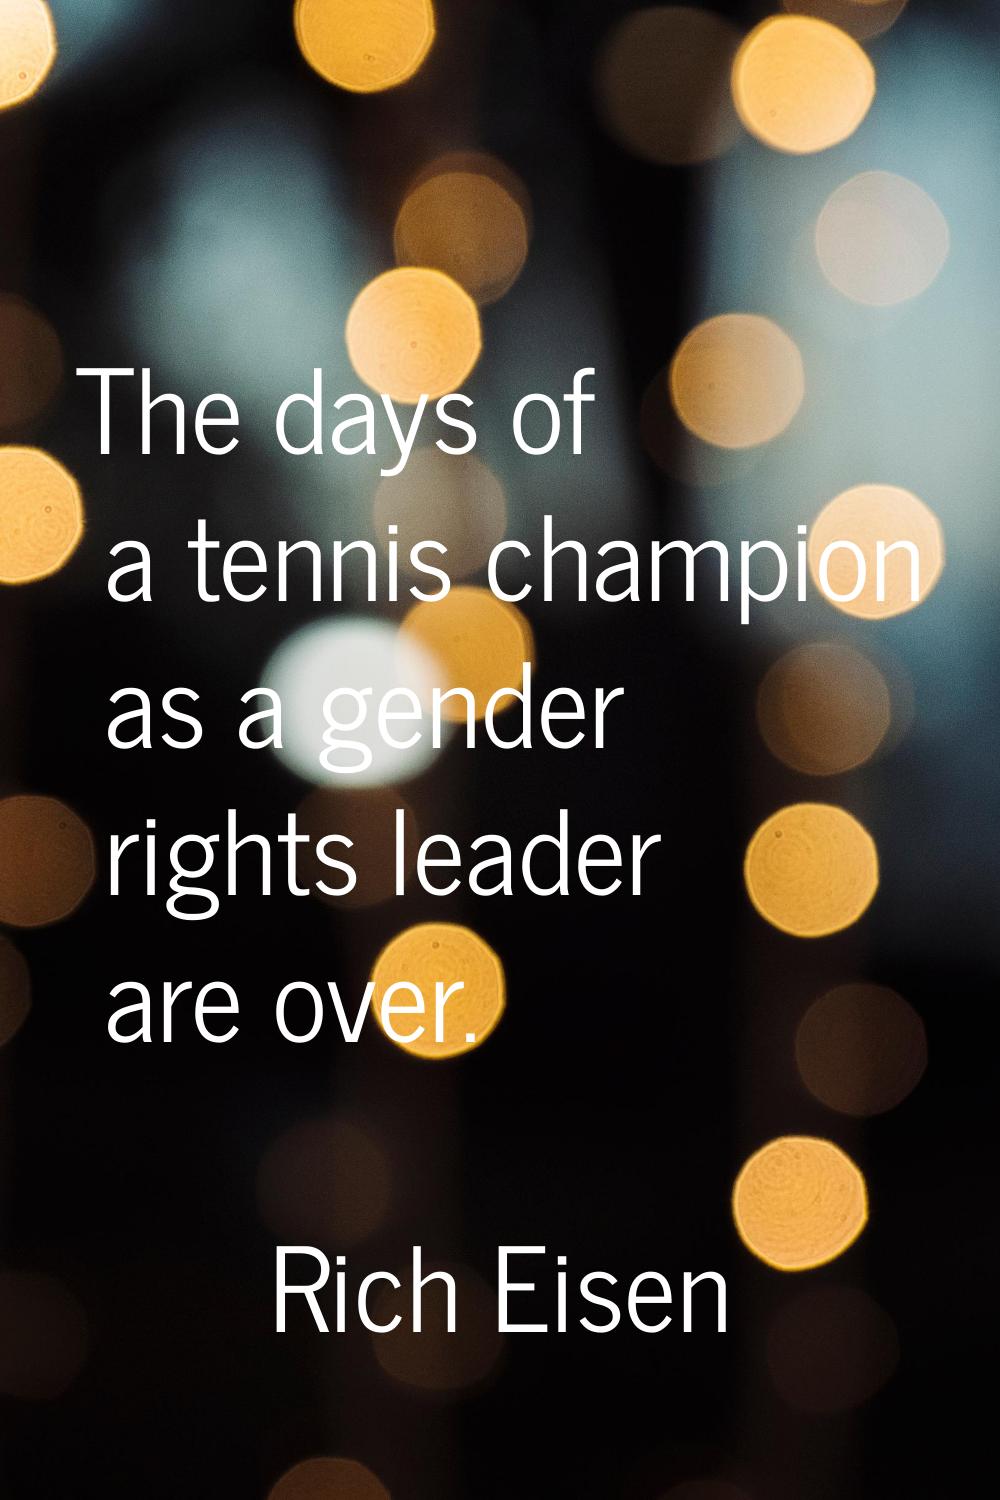 The days of a tennis champion as a gender rights leader are over.